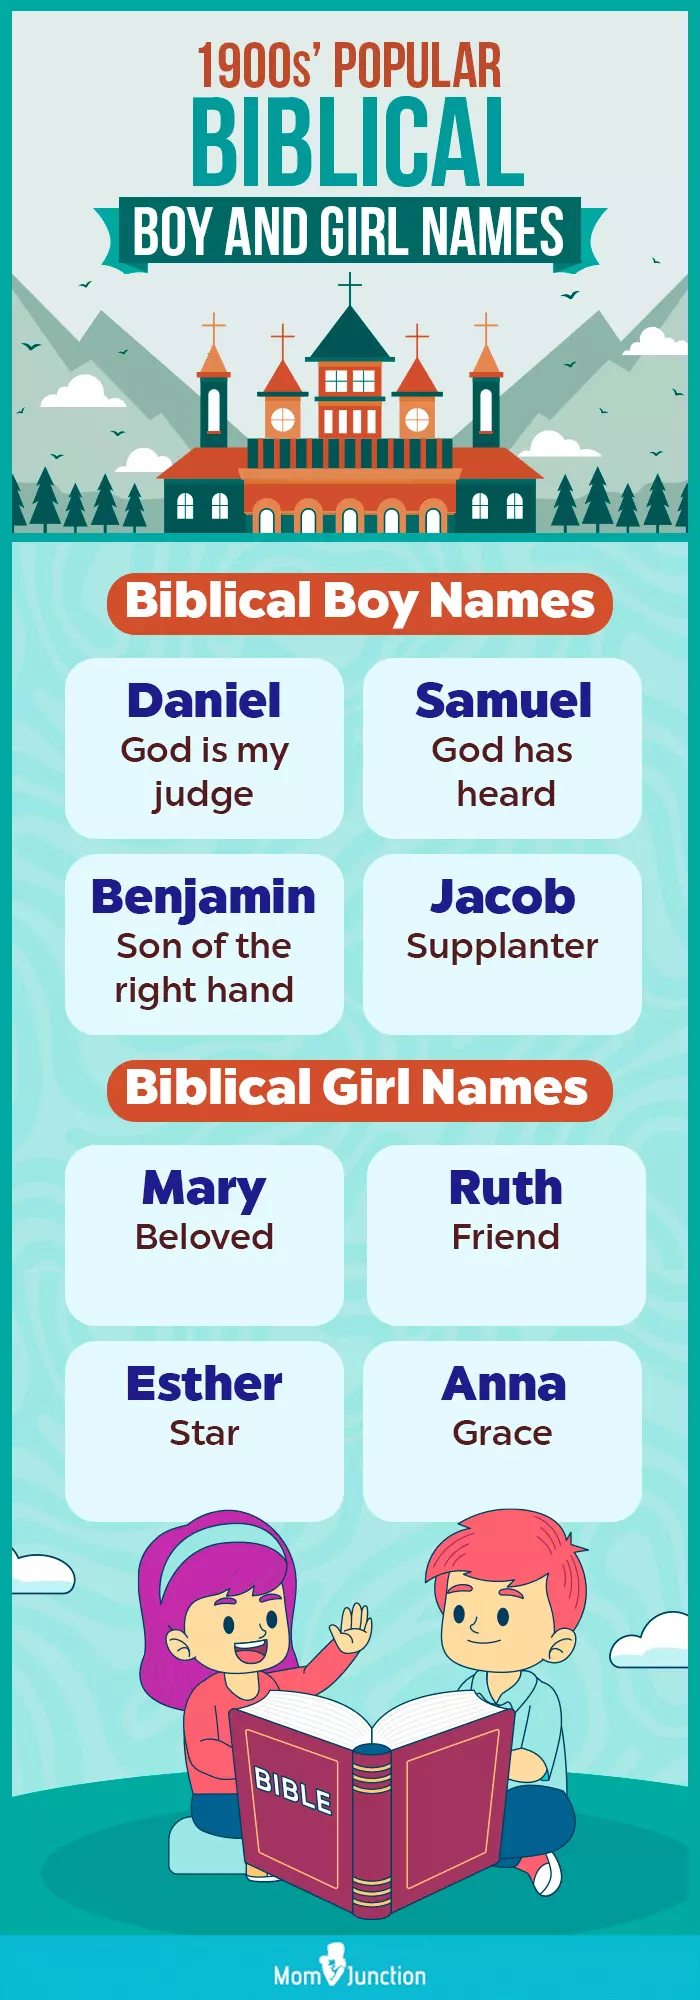 1900s popular biblical boy and girl names (infographic)